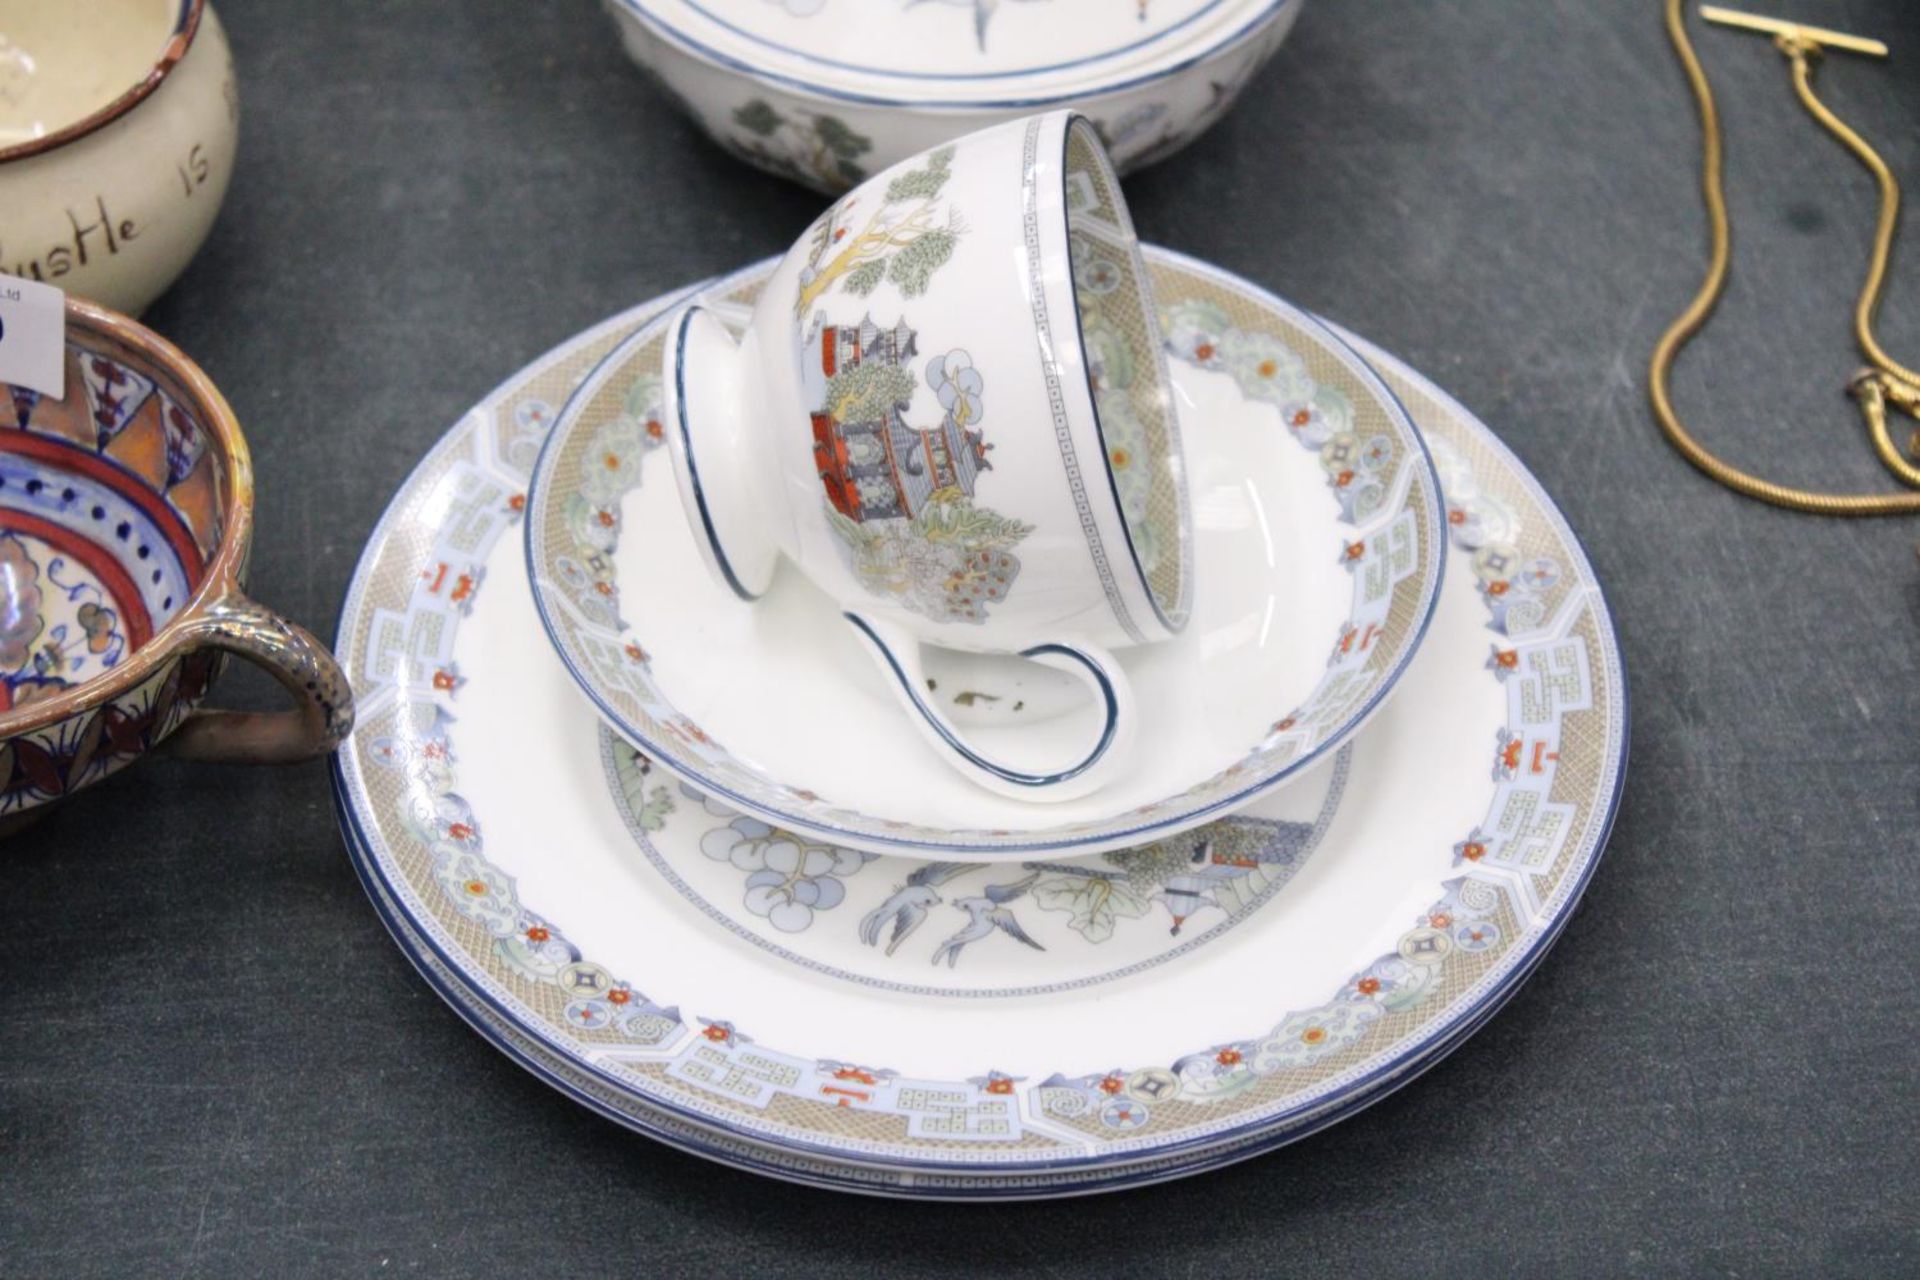 A PART ORIENTAL STYLE WEDGWOOD DINNER SERVICE TO INCLUDE A GRAVY JUG, CUP, PLATES ETC - Image 4 of 6